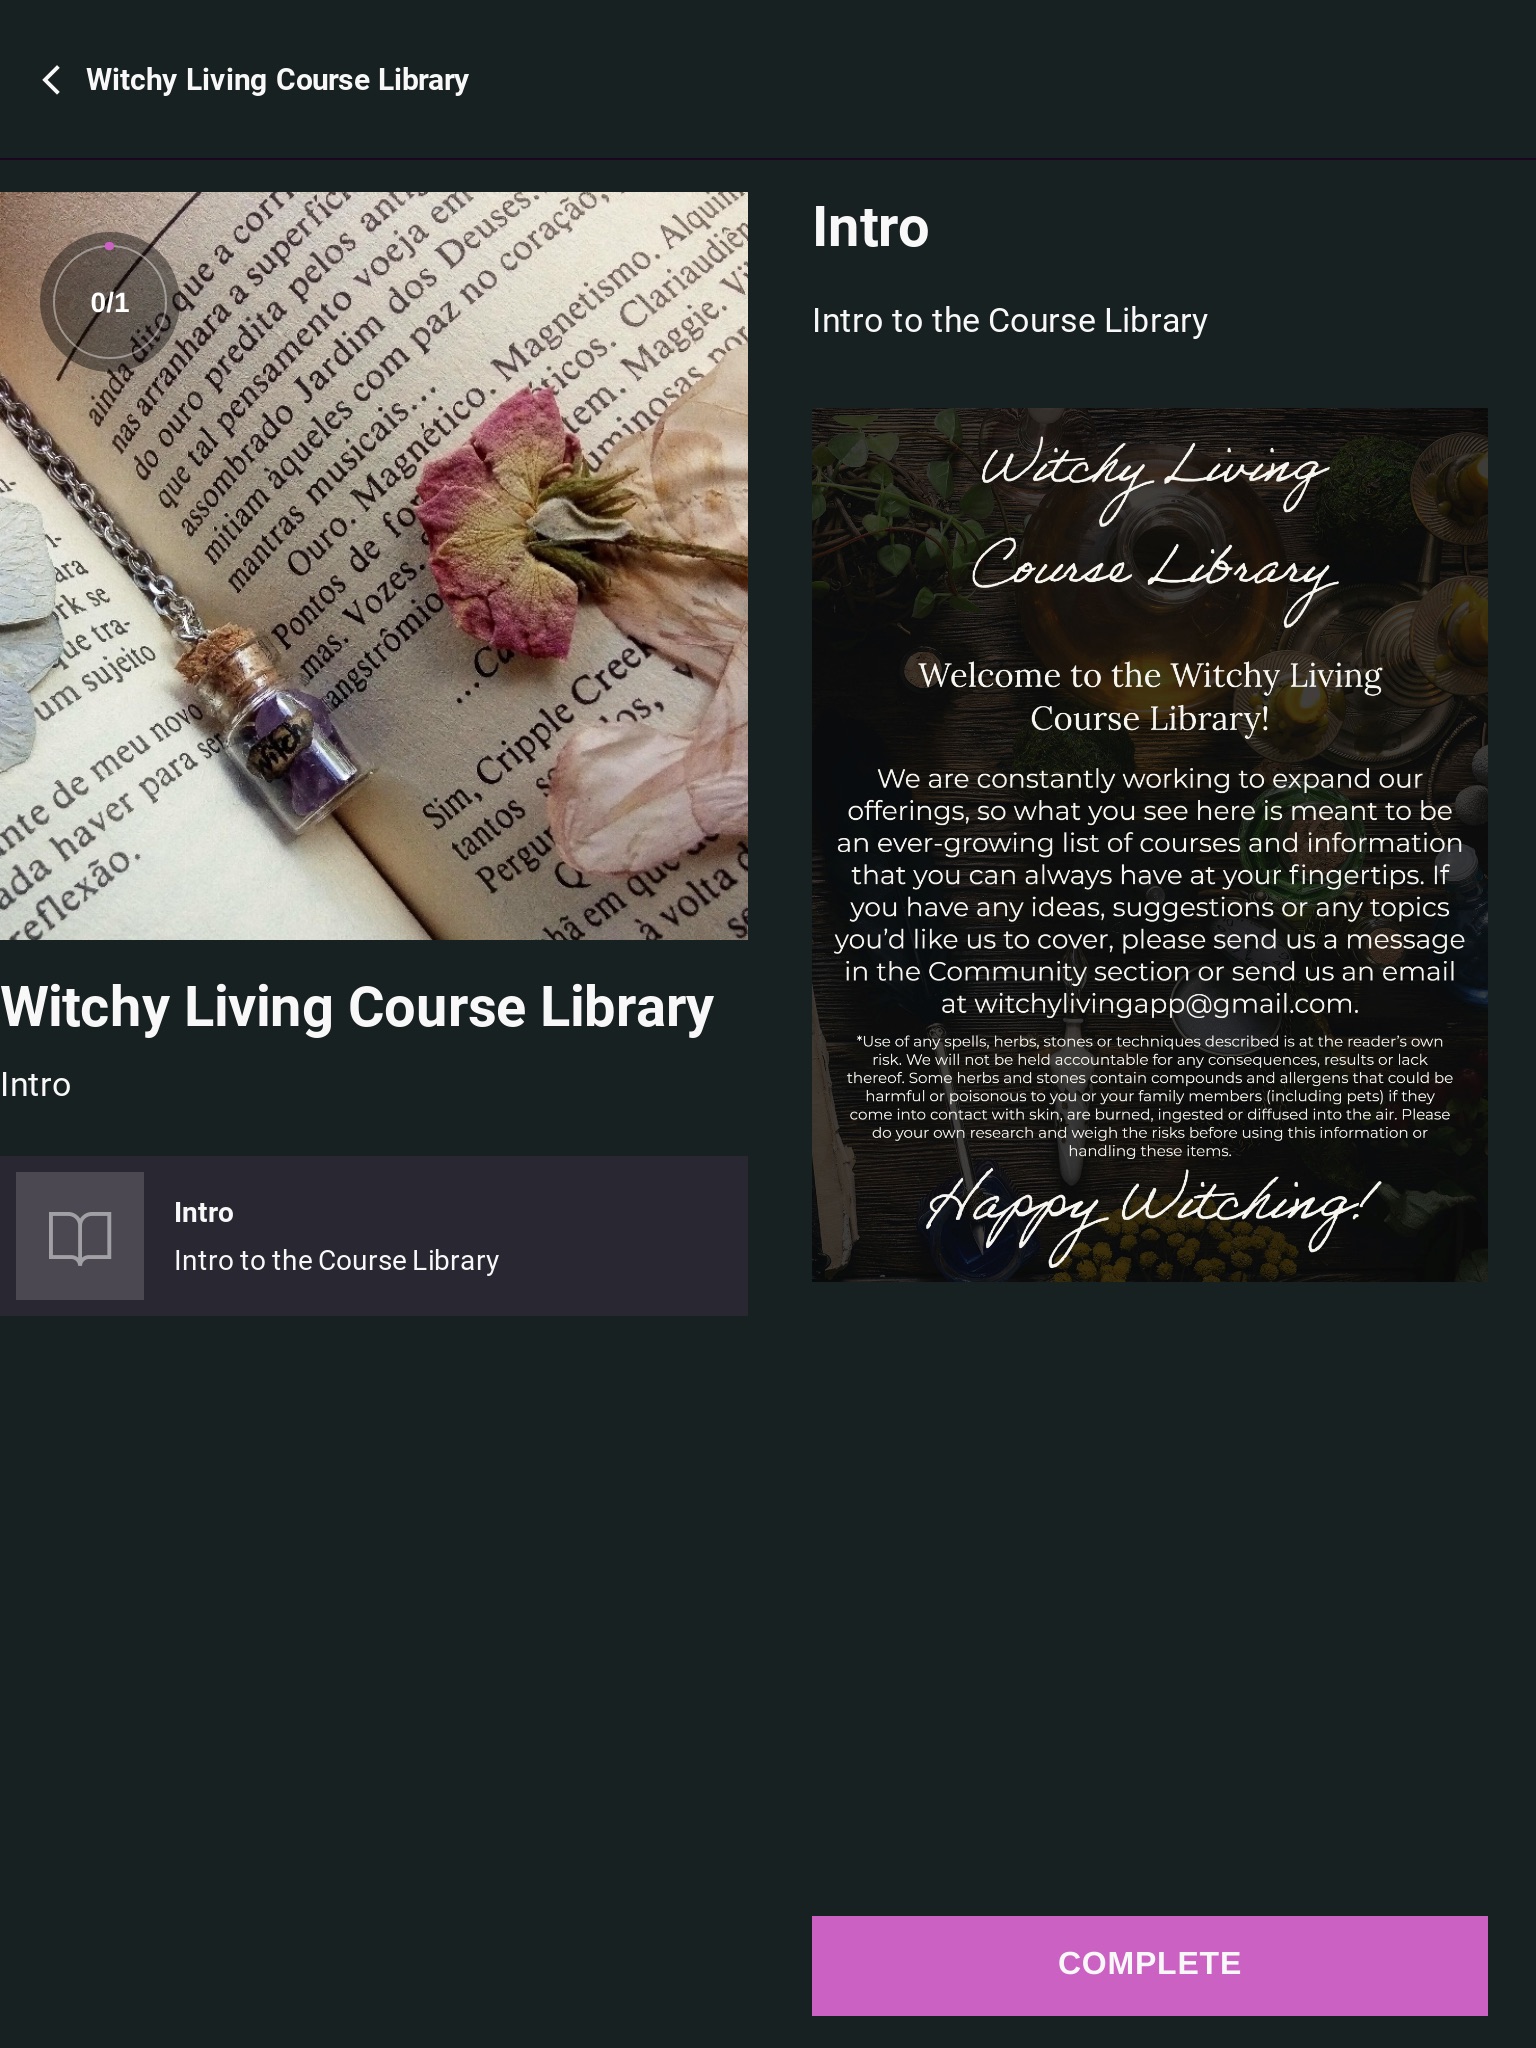 Witchy Living screenshot 4